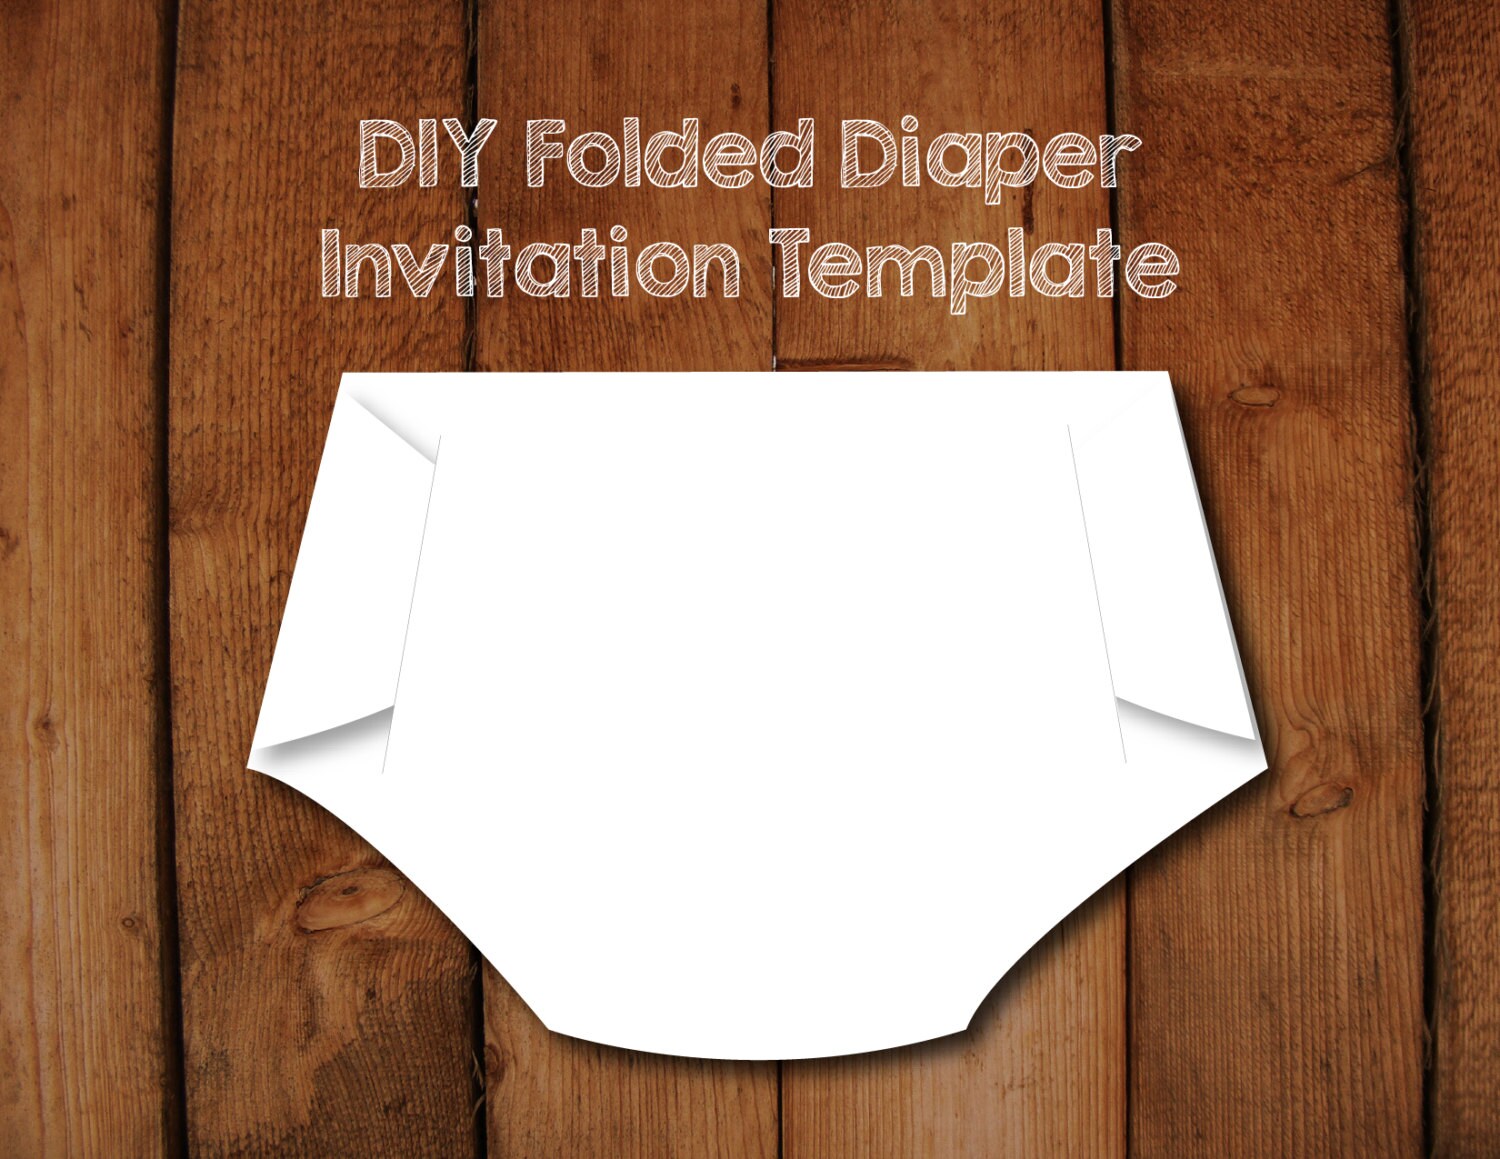 Folded Diaper Invitation DIY Template With Instructions How